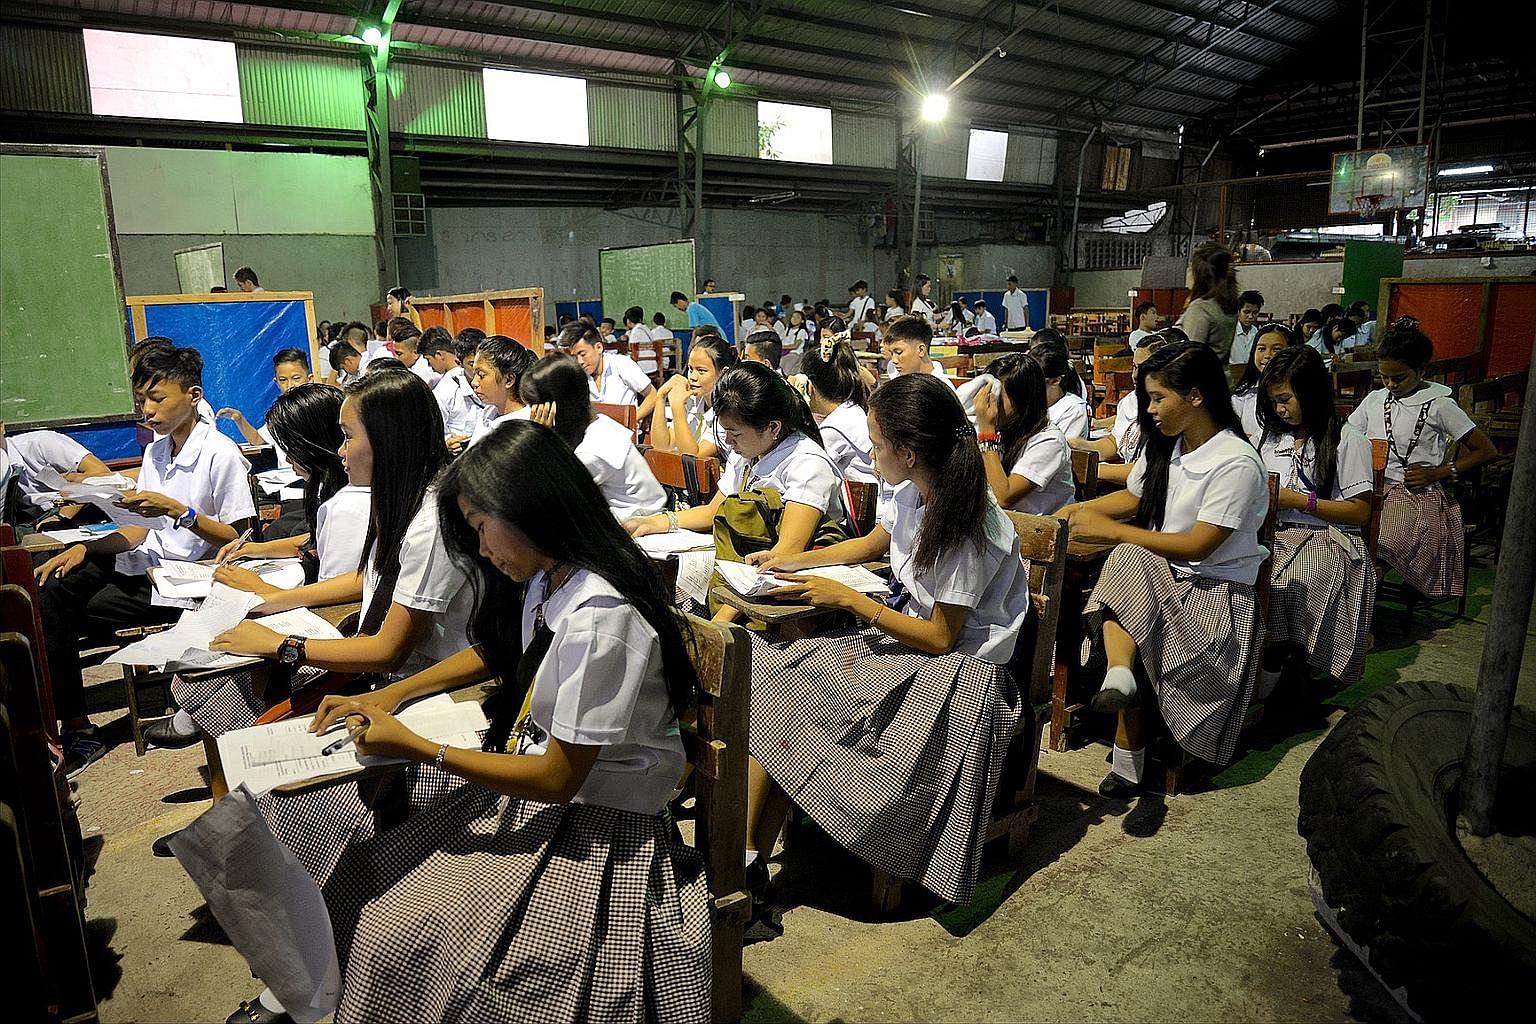 Students at the San Rafael Technological School in Navotas city, just an hour north of Manila, having classes inside a gymnasium. A new school building is being constructed that will give the 1,008 students 16 classrooms, double what they had before.